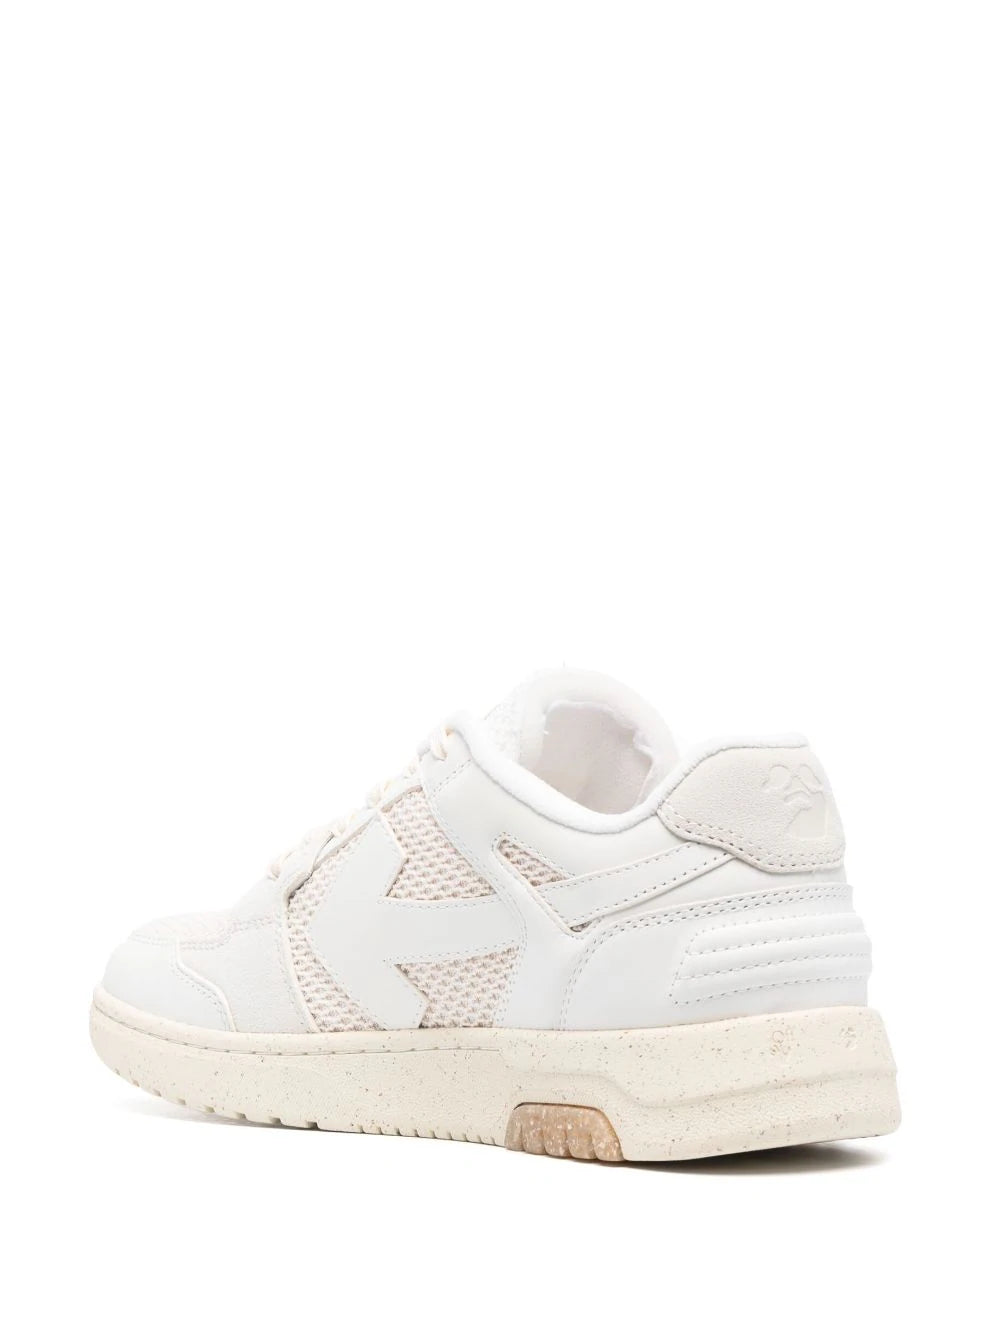 Off-White Out of Office Slim Leather Mesh Trainers in Cream White